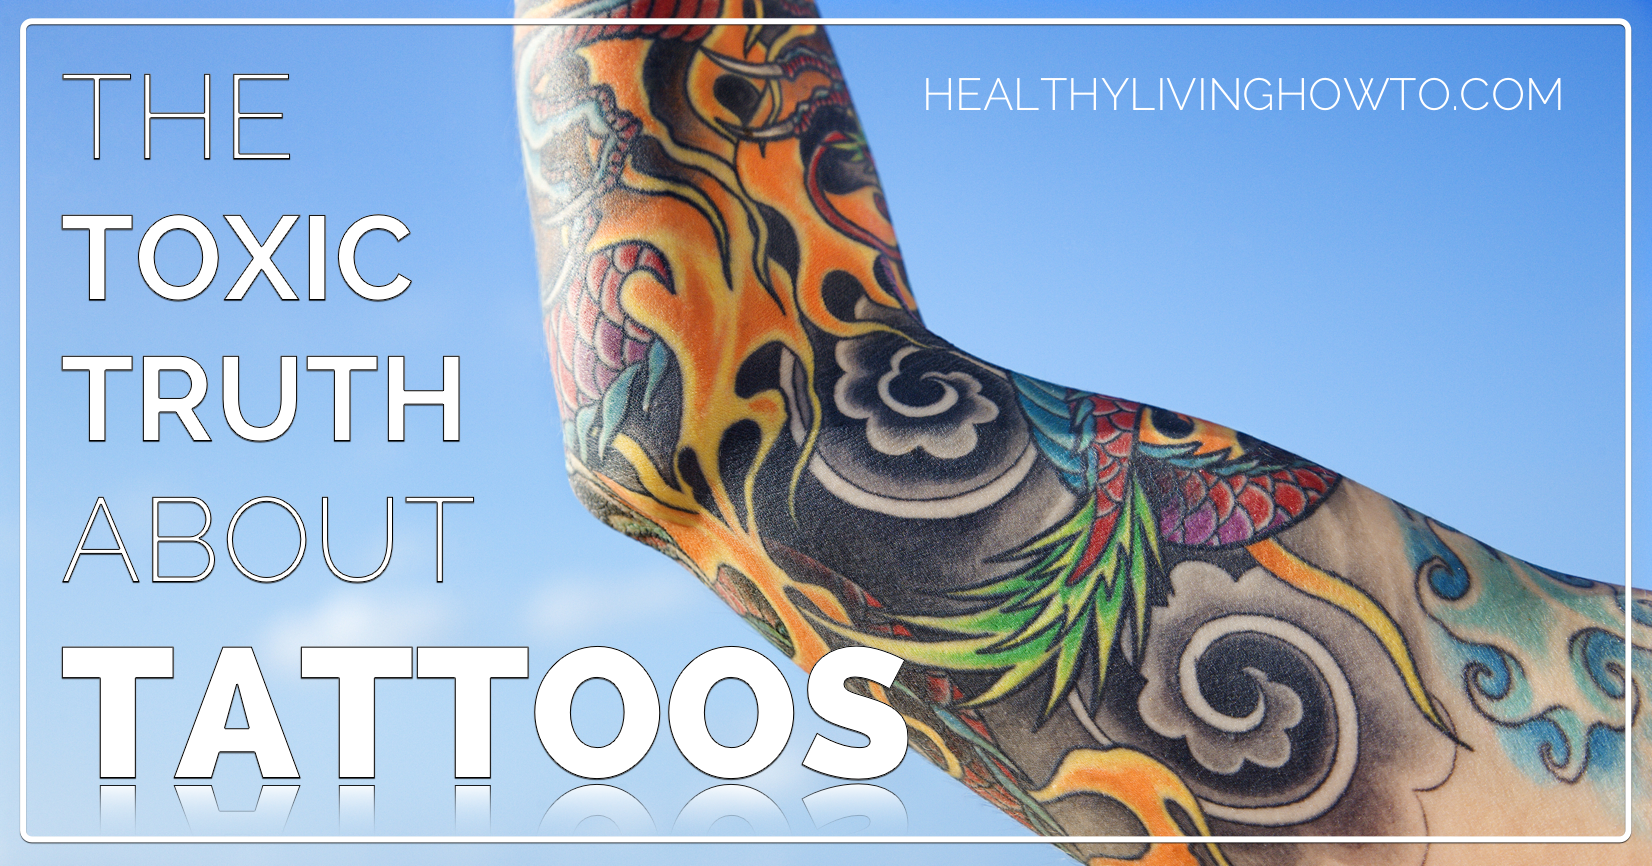 Nanoparticles in Tattoos May Cause Cancer - Healthy Living How To